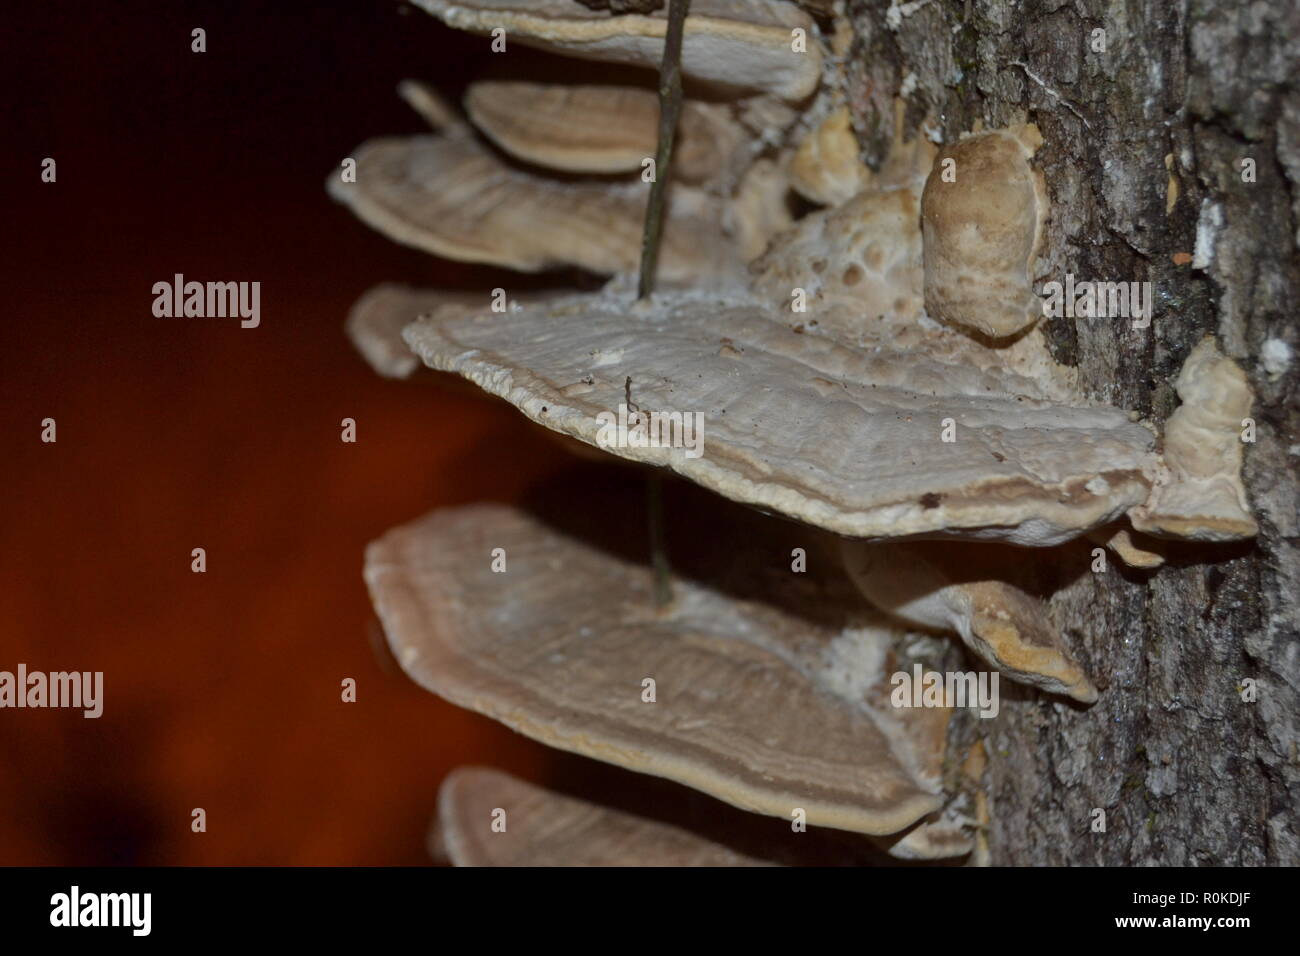 white-rot fungus Trametes pubescens growing on a rotting stump in the woods. Stock Photo